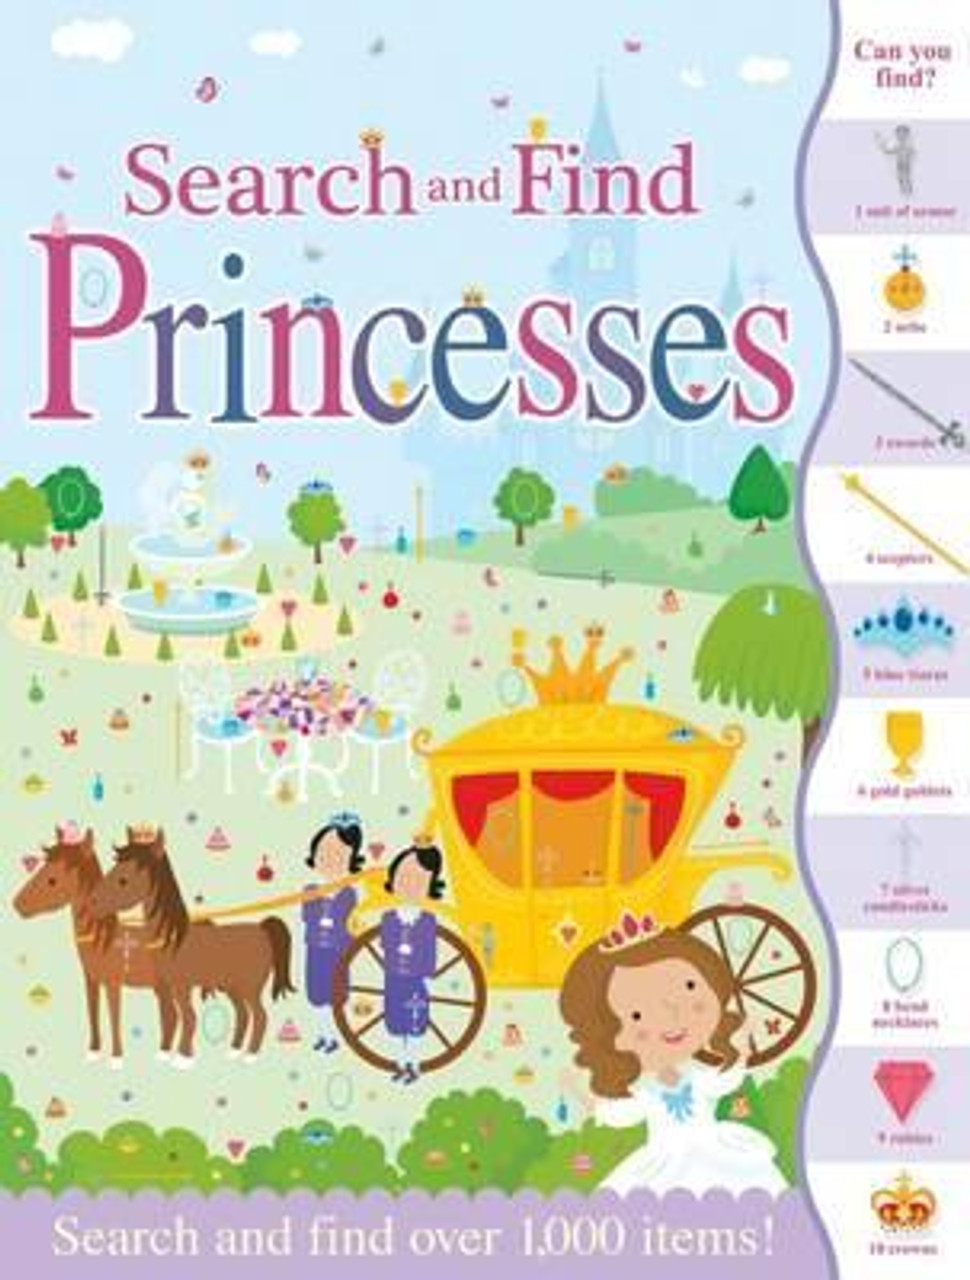 Susie Linn / Search and Find Princesses (Children's Picture Book)